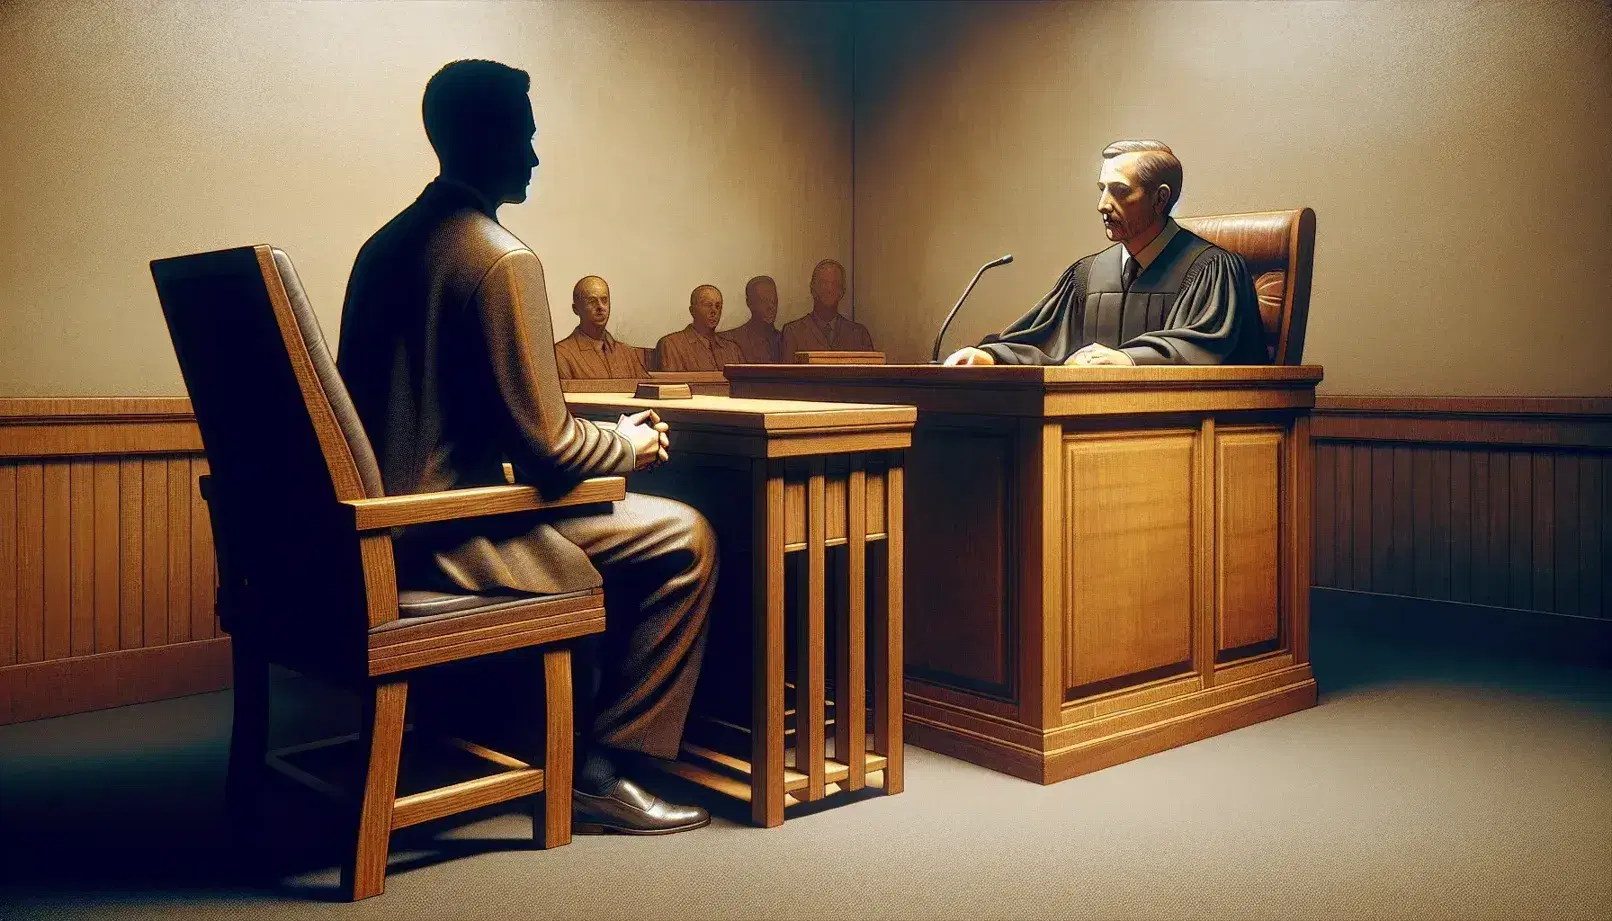 An attentive judge in a black robe behind a wooden bench talks to a calm defendant at the podium in a courtroom with neutral tones and soft lighting.